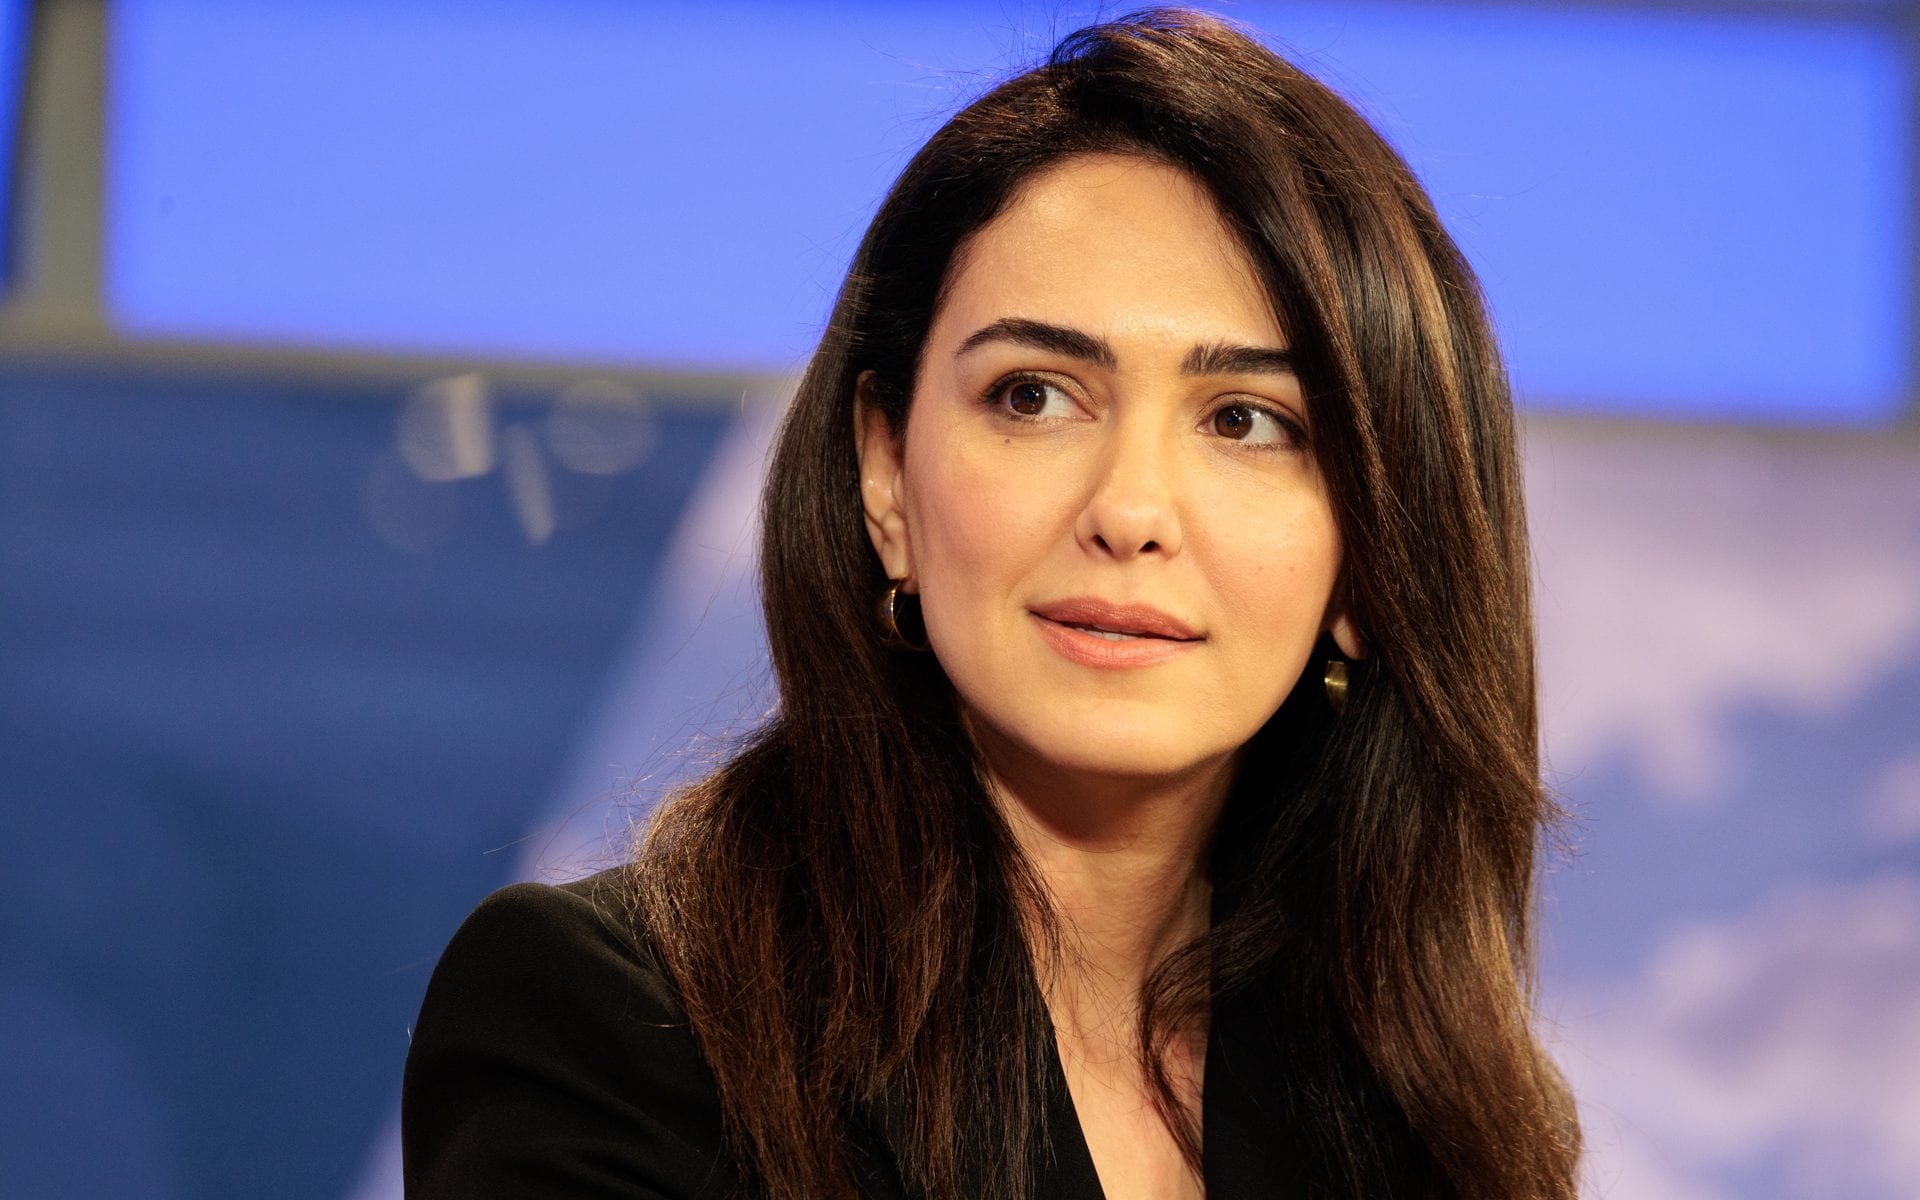 Nazanin Boniadi visited GW to talk about about the status of women in Iran. (Photos by William Atkins/GW Today)